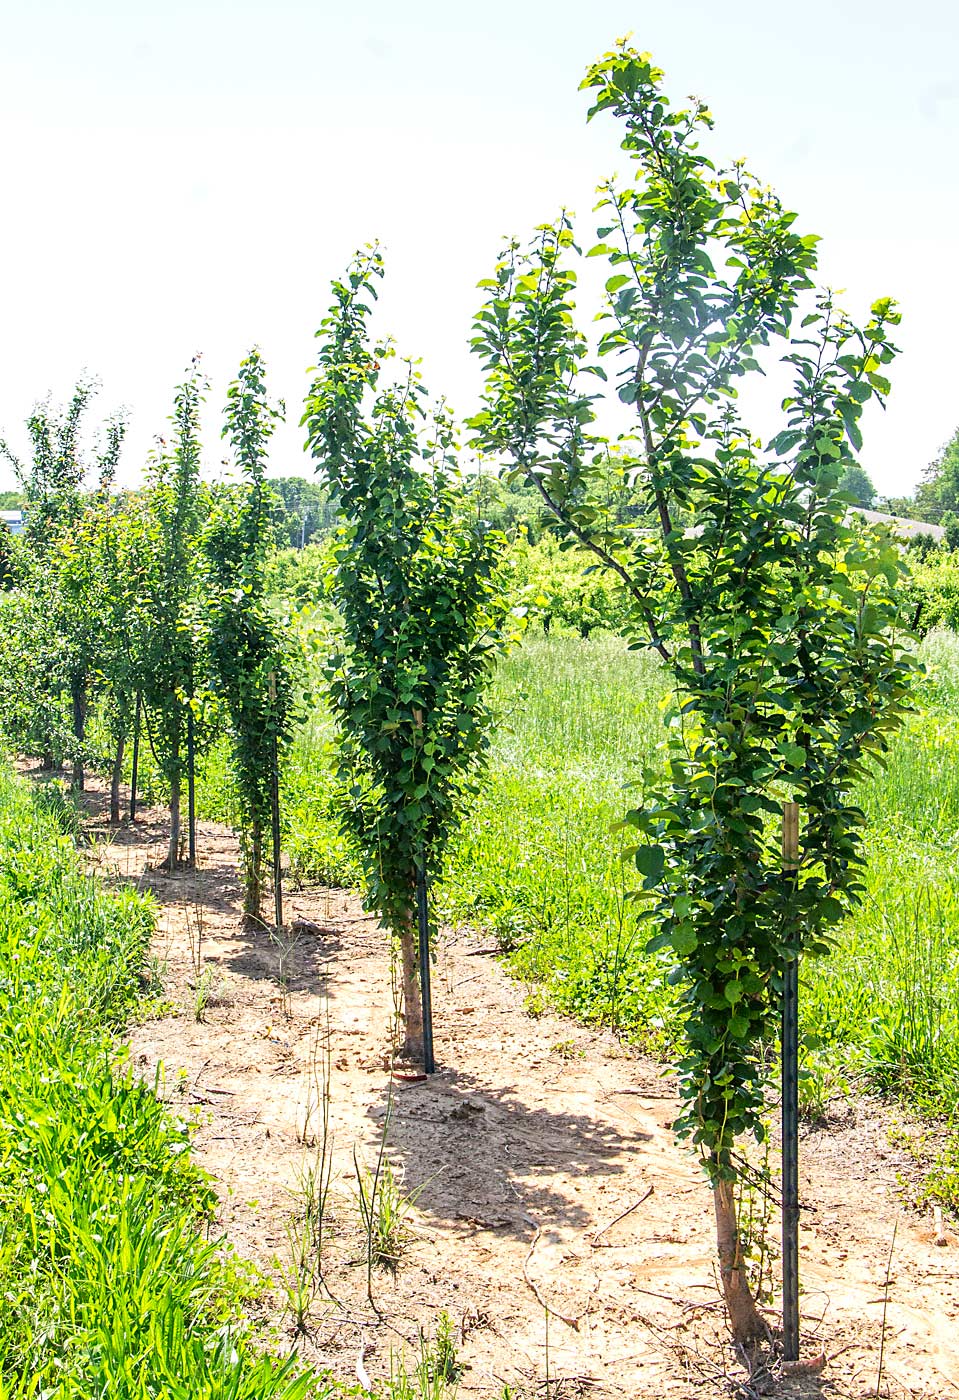 These plum trees were genetically engineered to grow straight up. After researchers identified a gene that causes this pillar-type growth in peaches, they wanted to see if the same gene could be altered in plum. Researchers plan to run rudimentary training system experiments to see if the upright structure could offer management benefits, said Dardick. (Kate Prengaman/Good Fruit Grower)